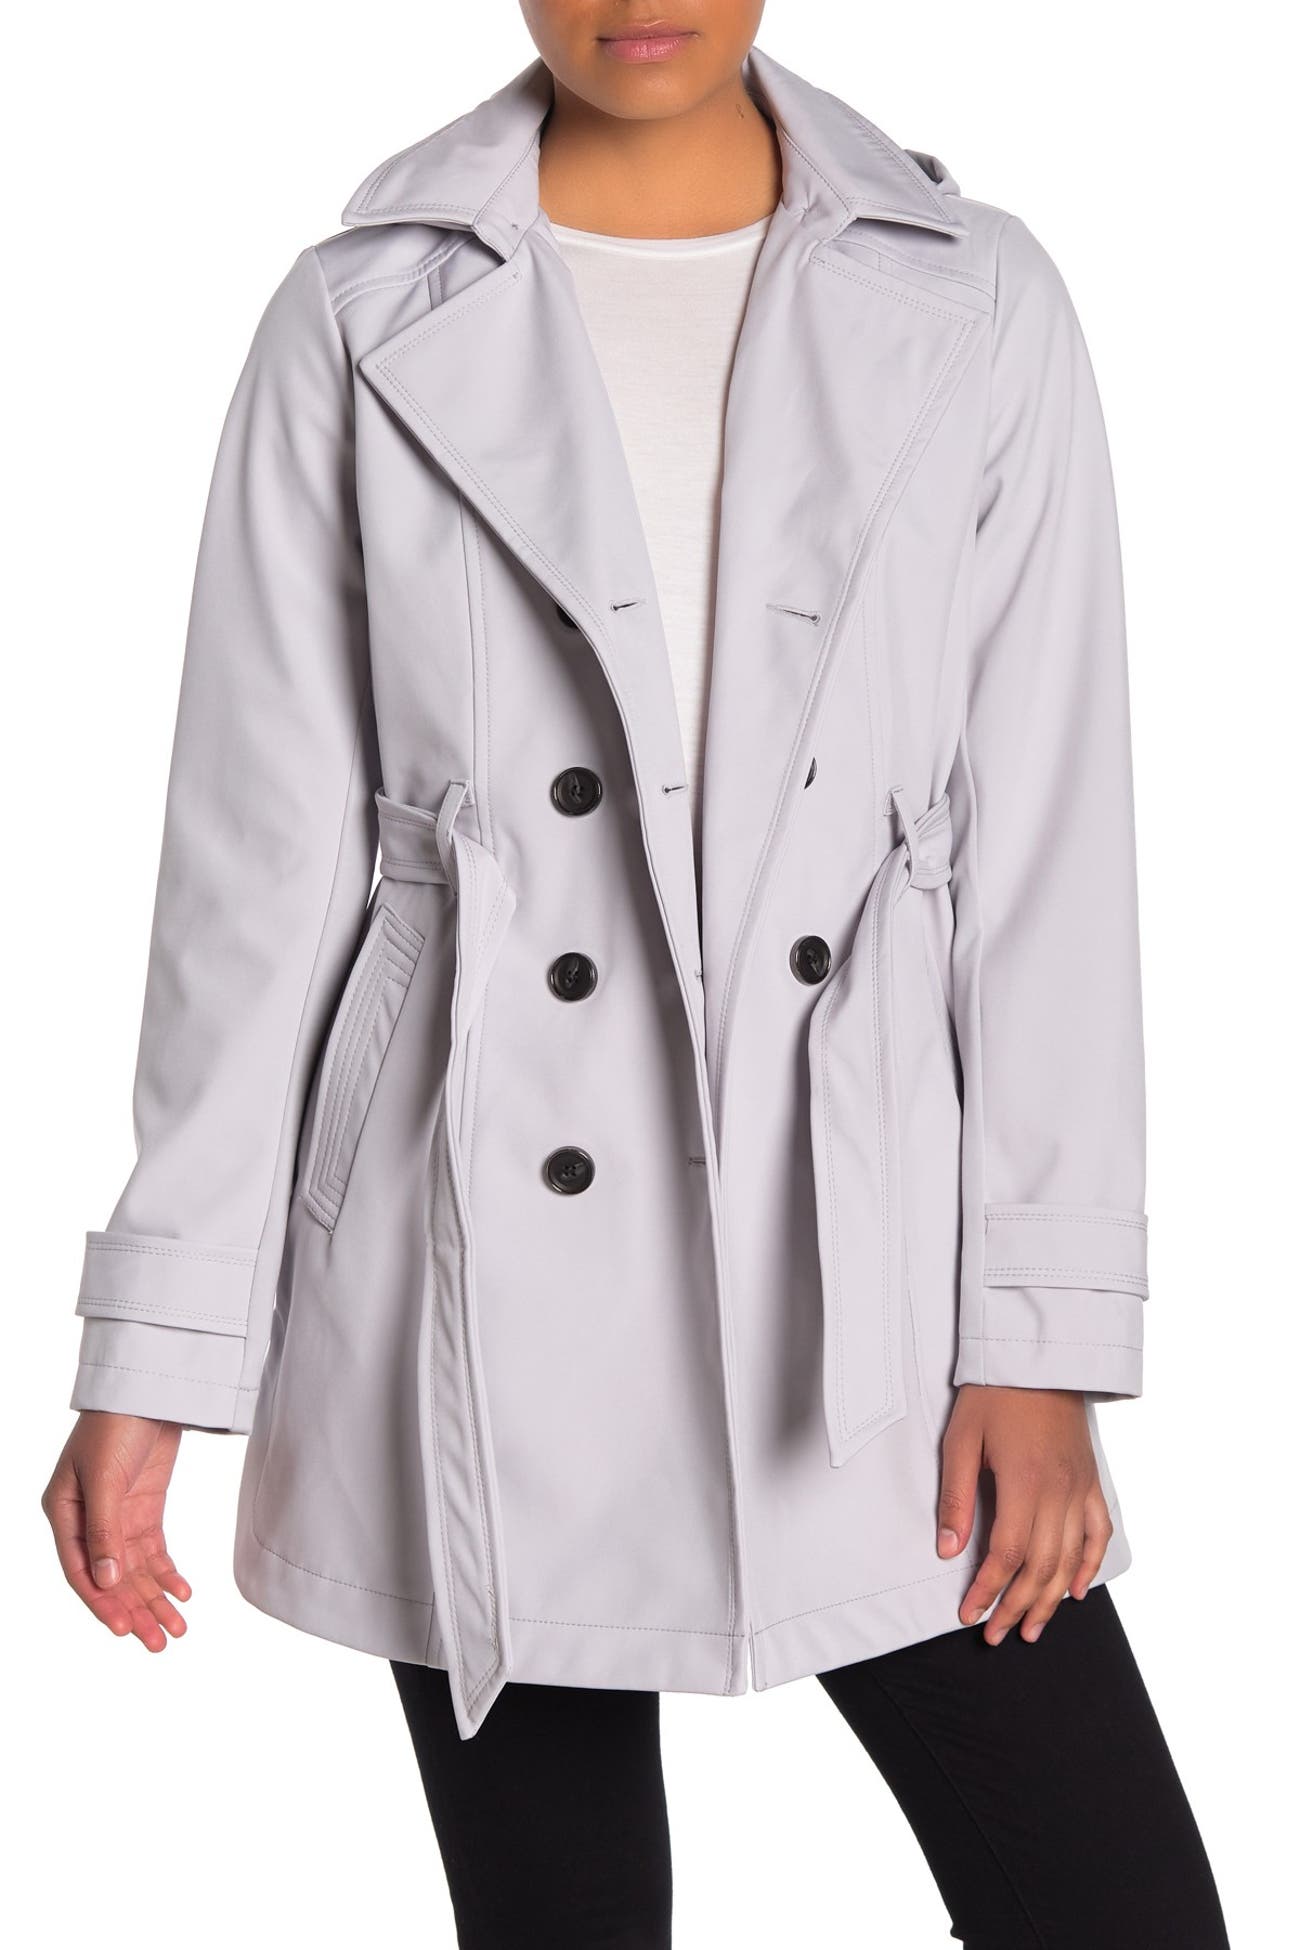 Sebby | Soft Shell Double Breast Water Resistant Trench Coat | HauteLook